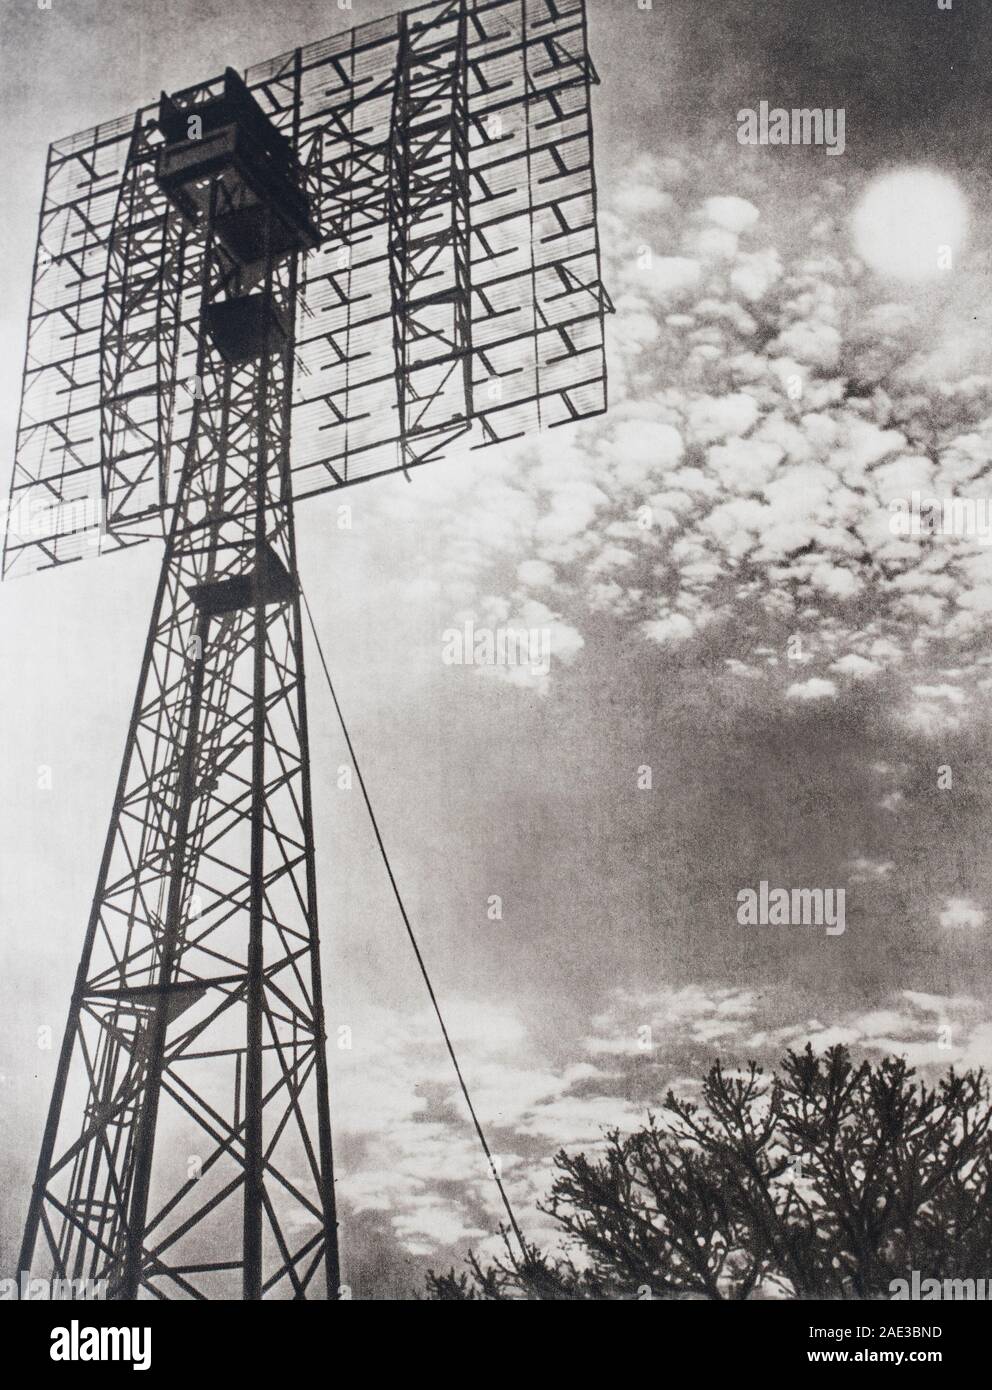 A radar emission Tower, the precious discovery that helped ensure the safety of the air and sea routes. Stock Photo